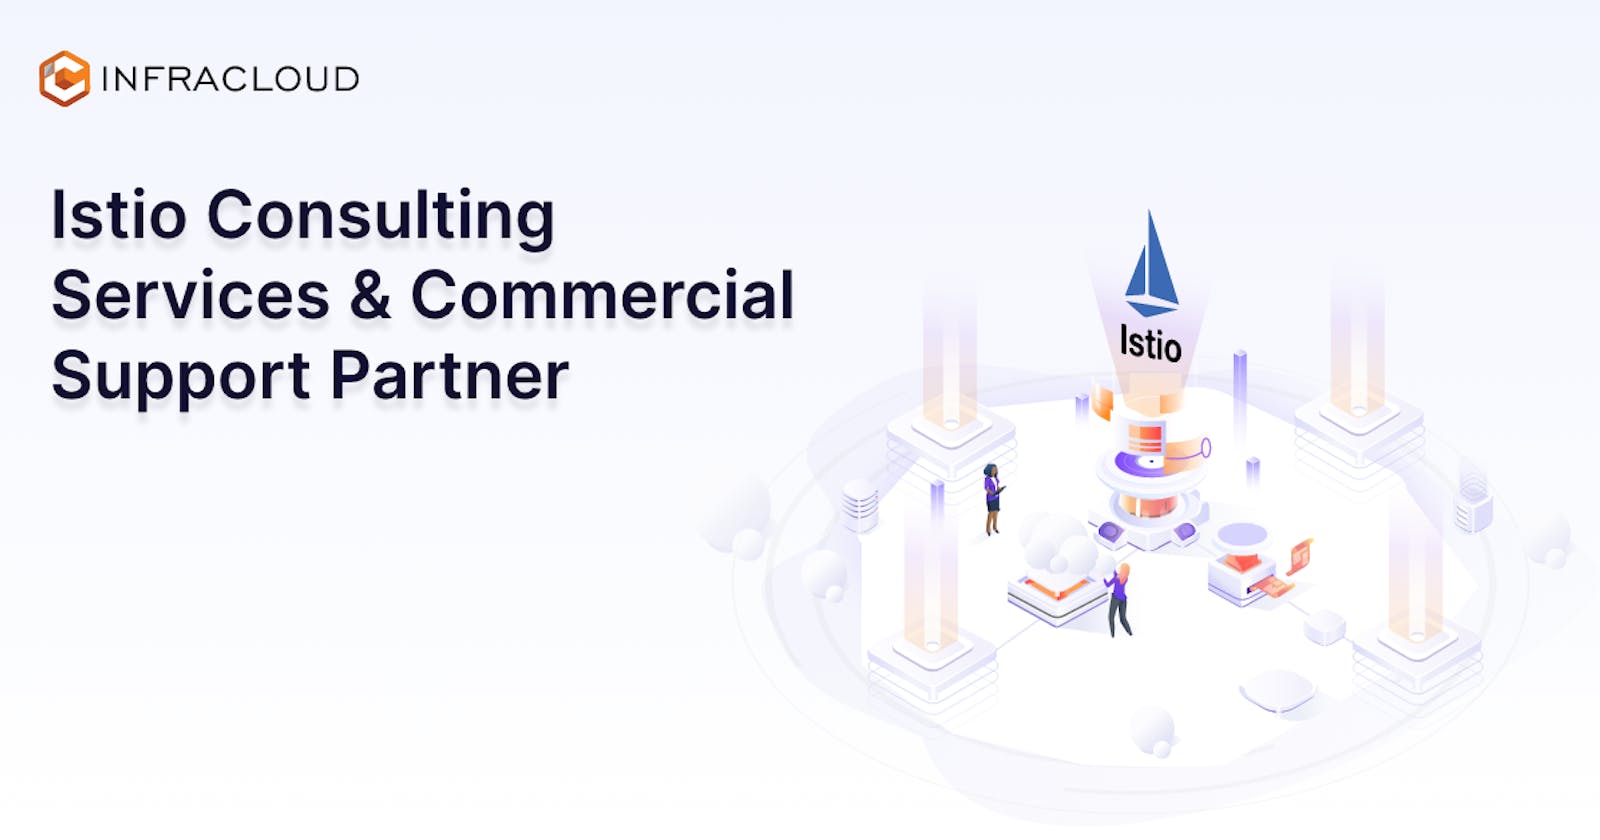 Istio Consulting Services & Commercial Support Partner